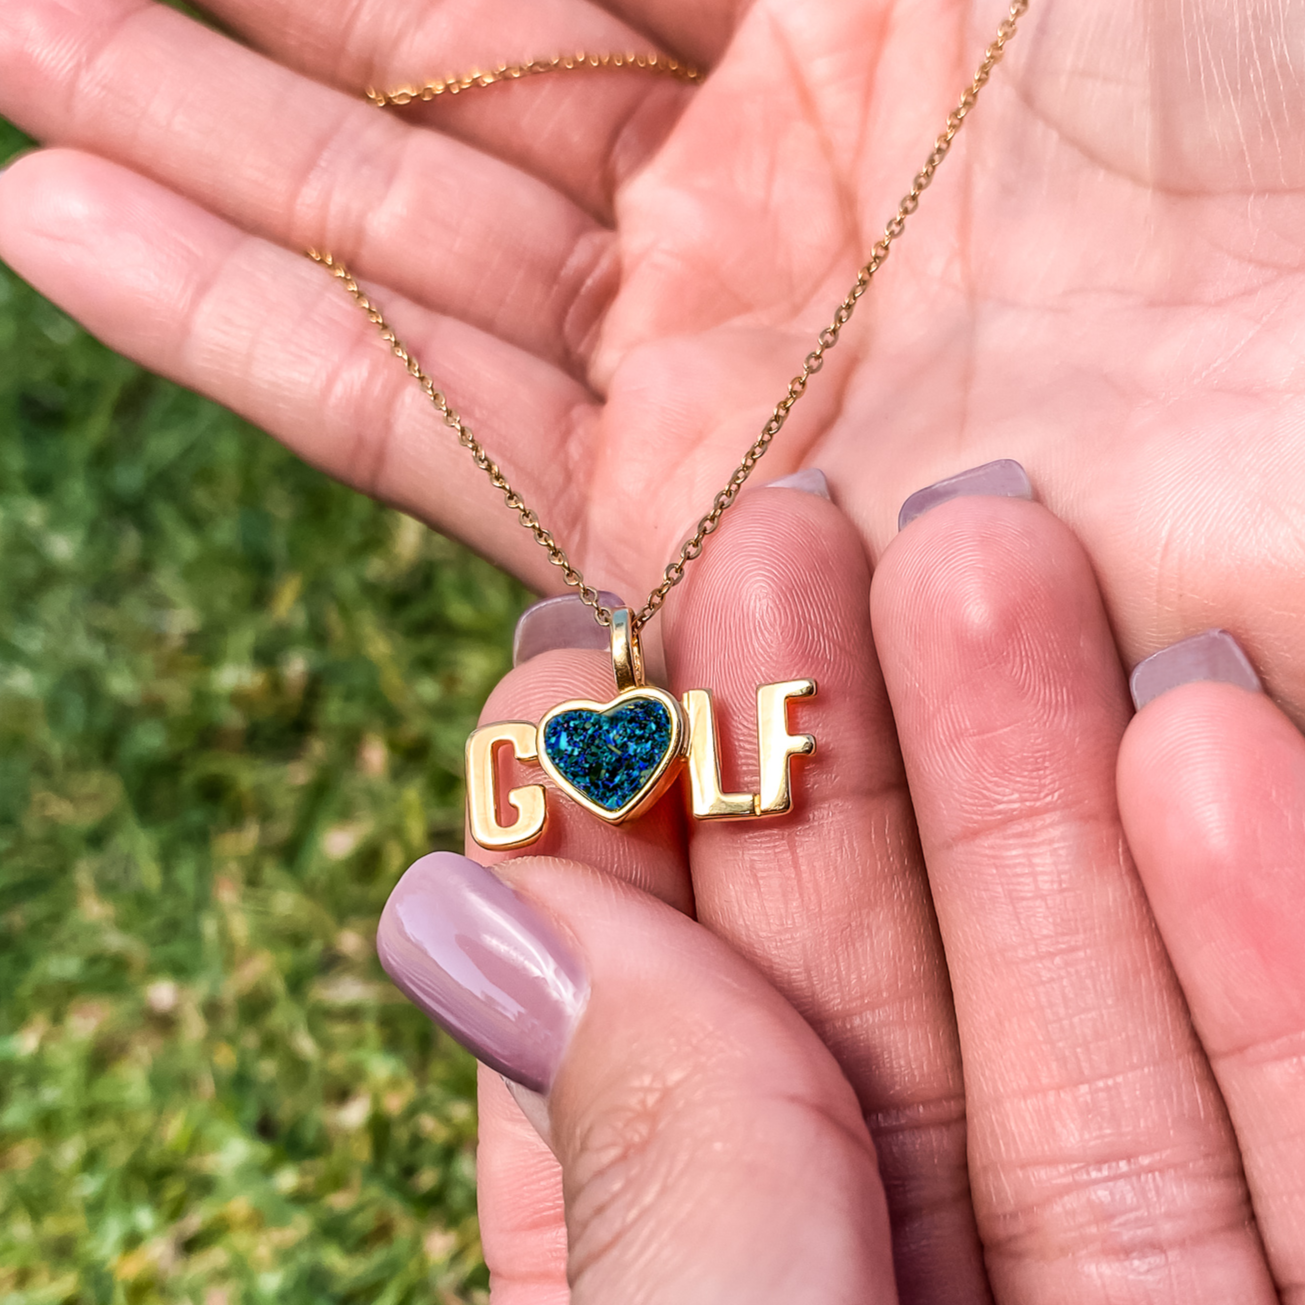 Golf Gold Pendant Necklace with Gemstone | Jewelry Gift for